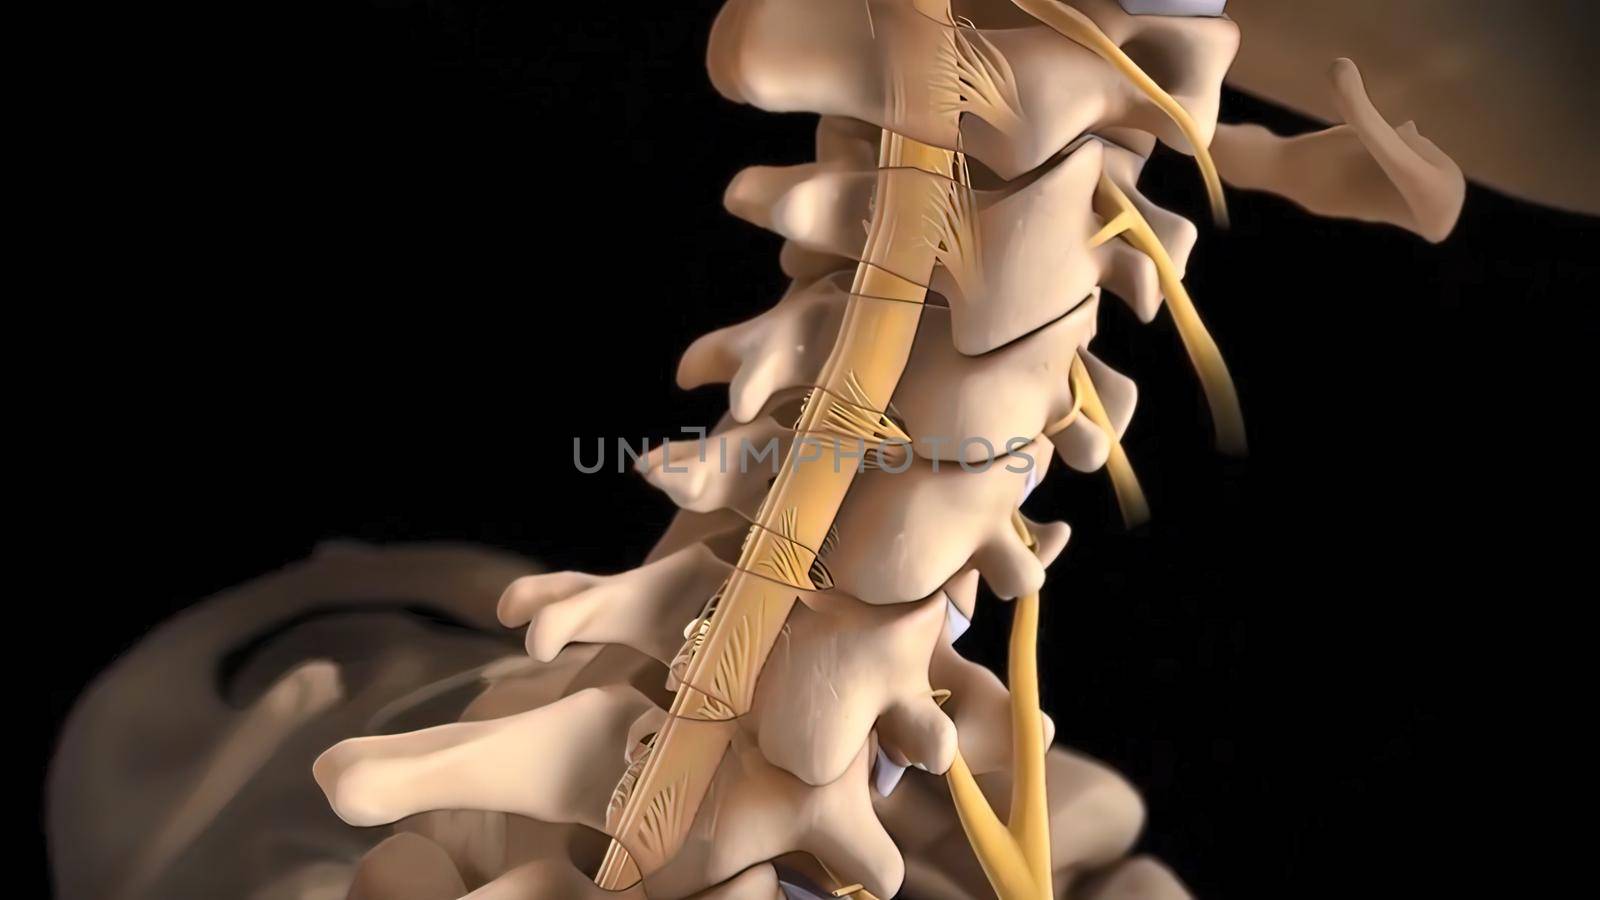 Human spine with nerve roots. by creativepic